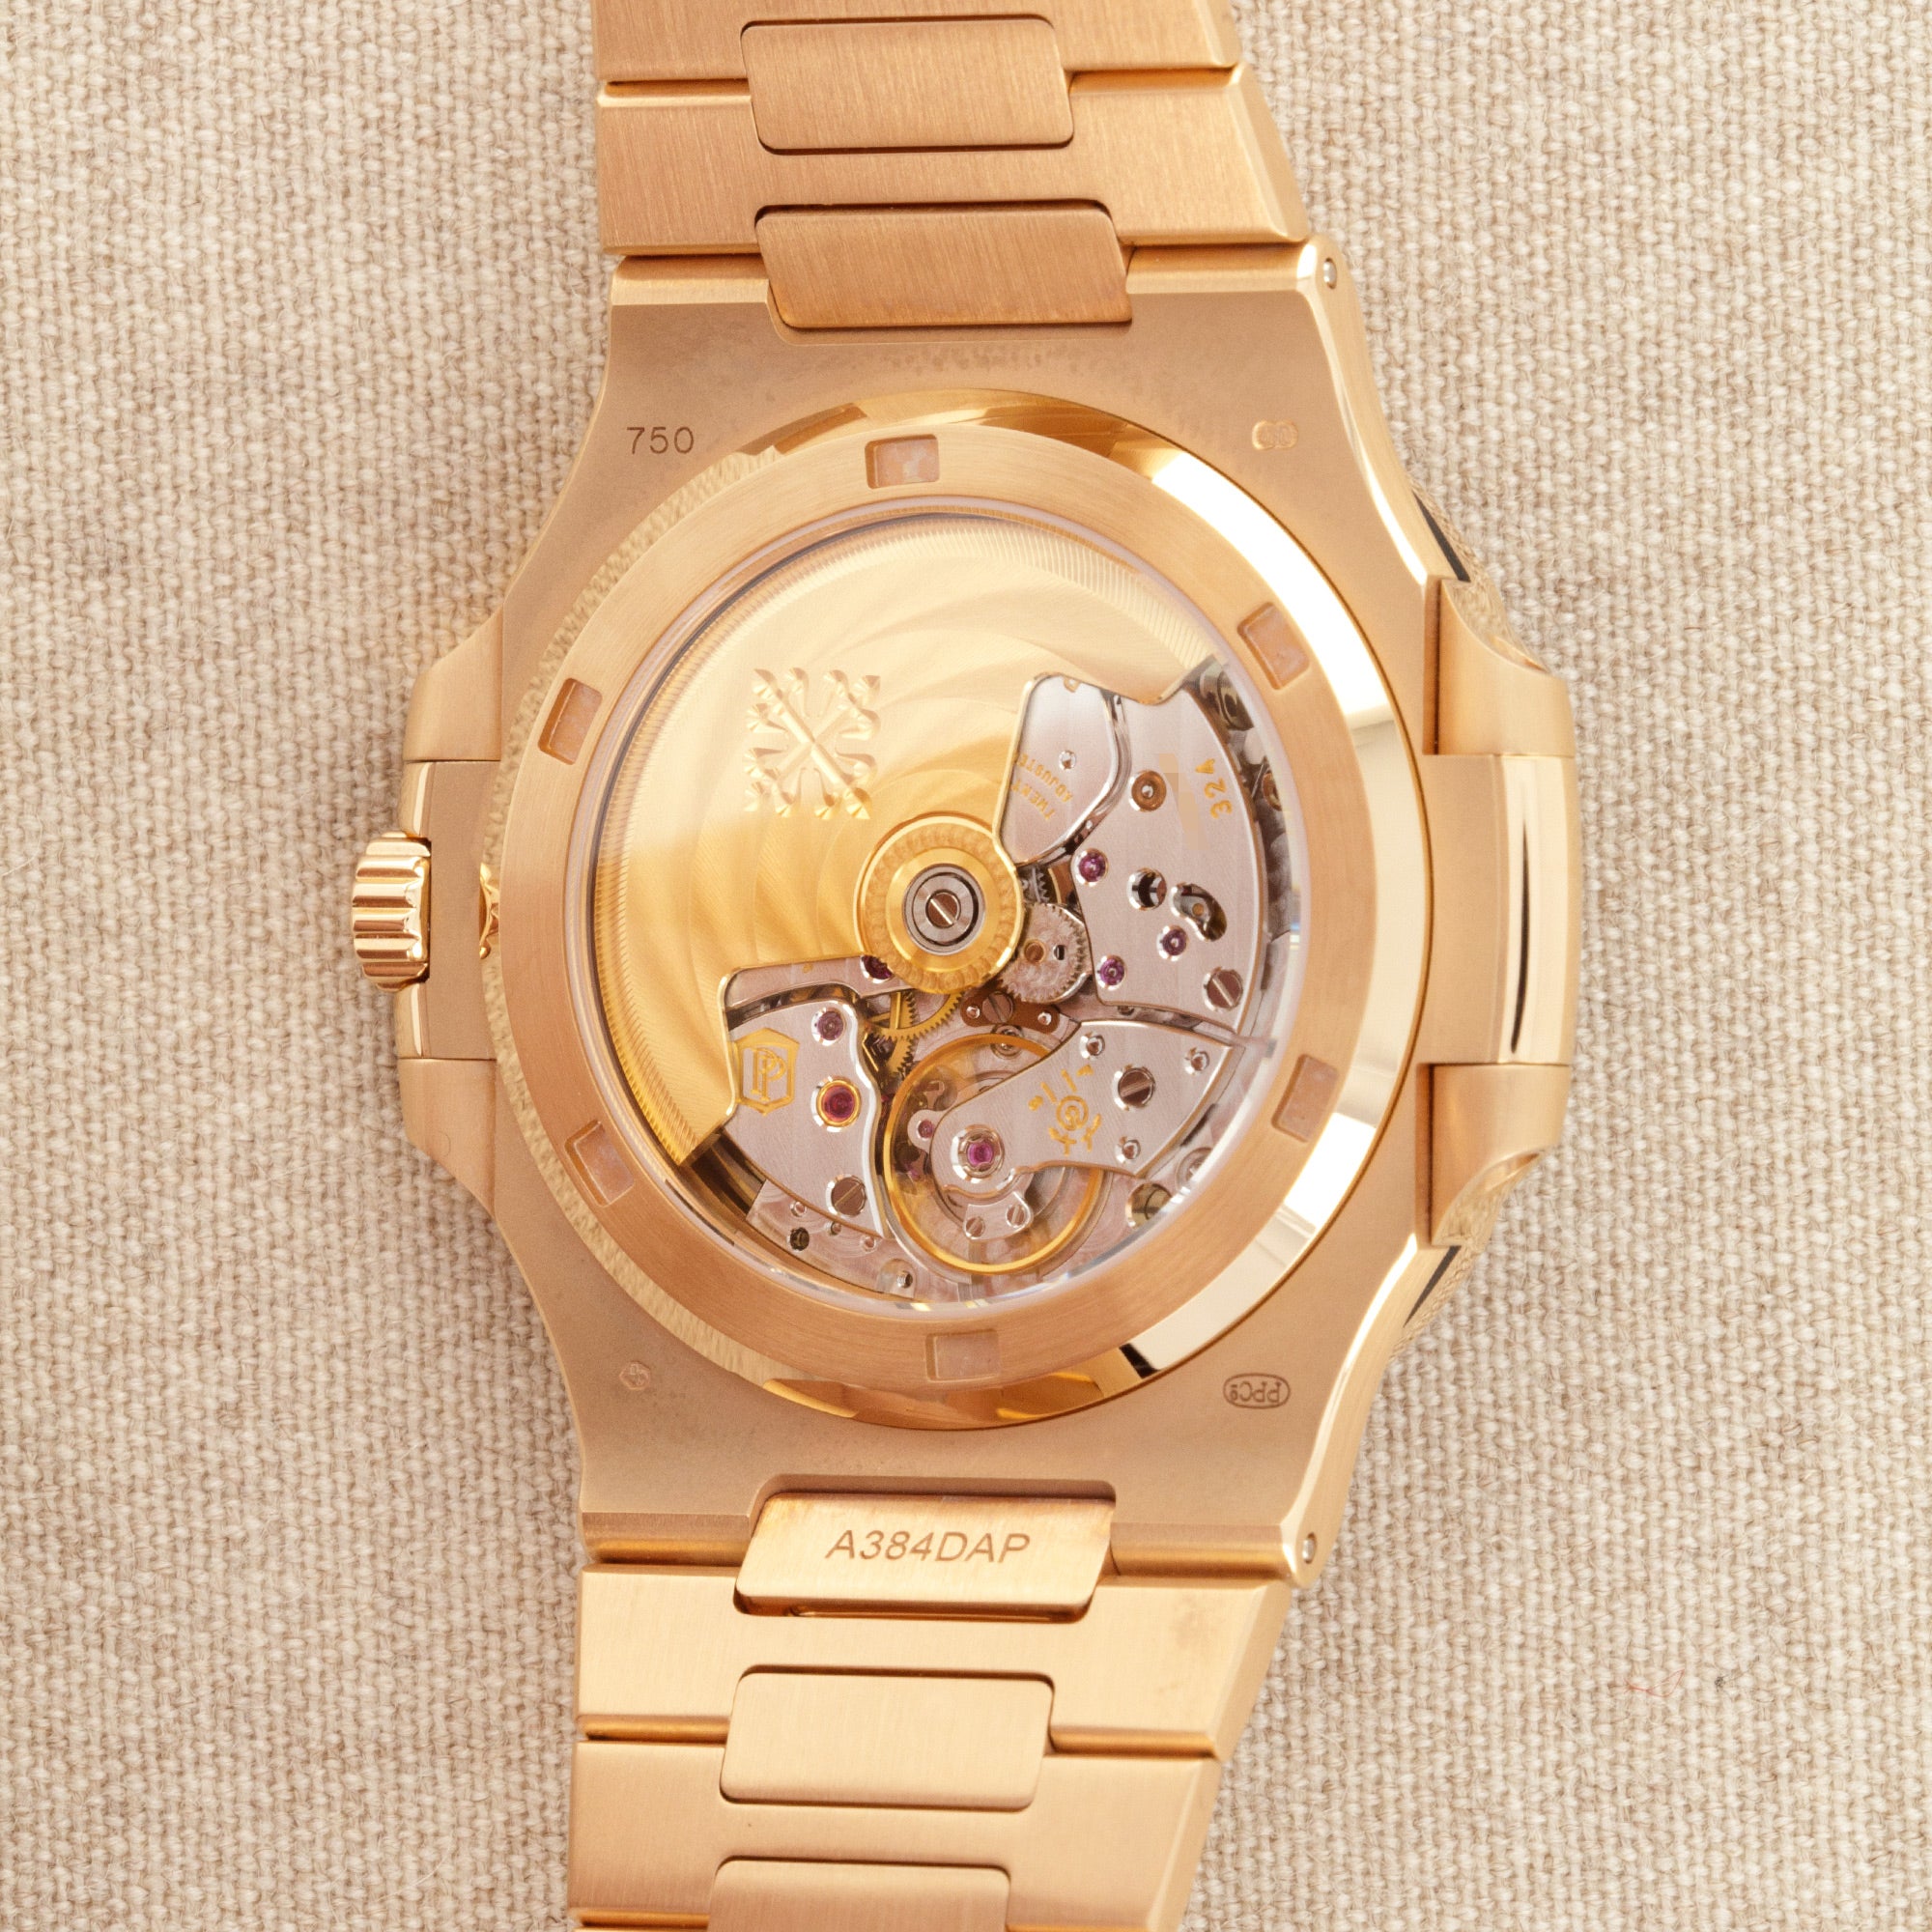 Patek Philippe - Patek Philippe Rose Gold Nautilus Watch Ref. 5723 with Factory Ruby Dial and Bezel - The Keystone Watches